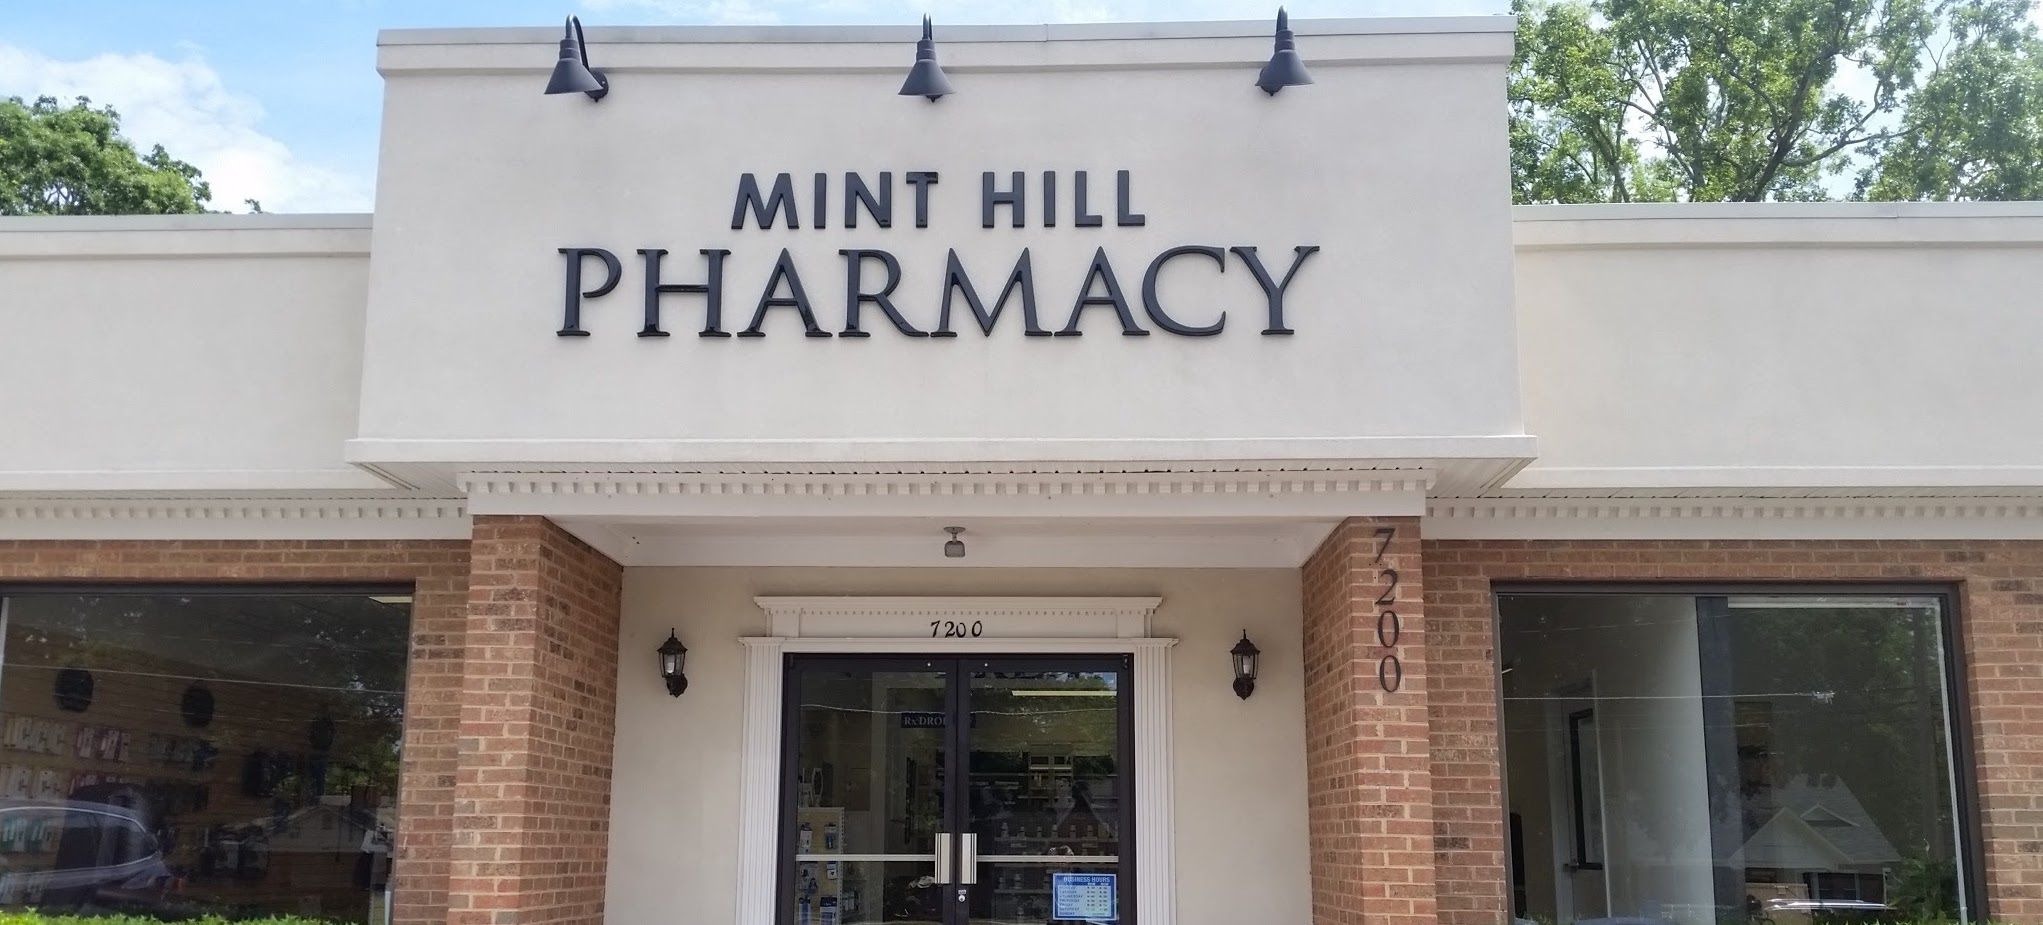 Welcome to Mint Hill Pharmacy